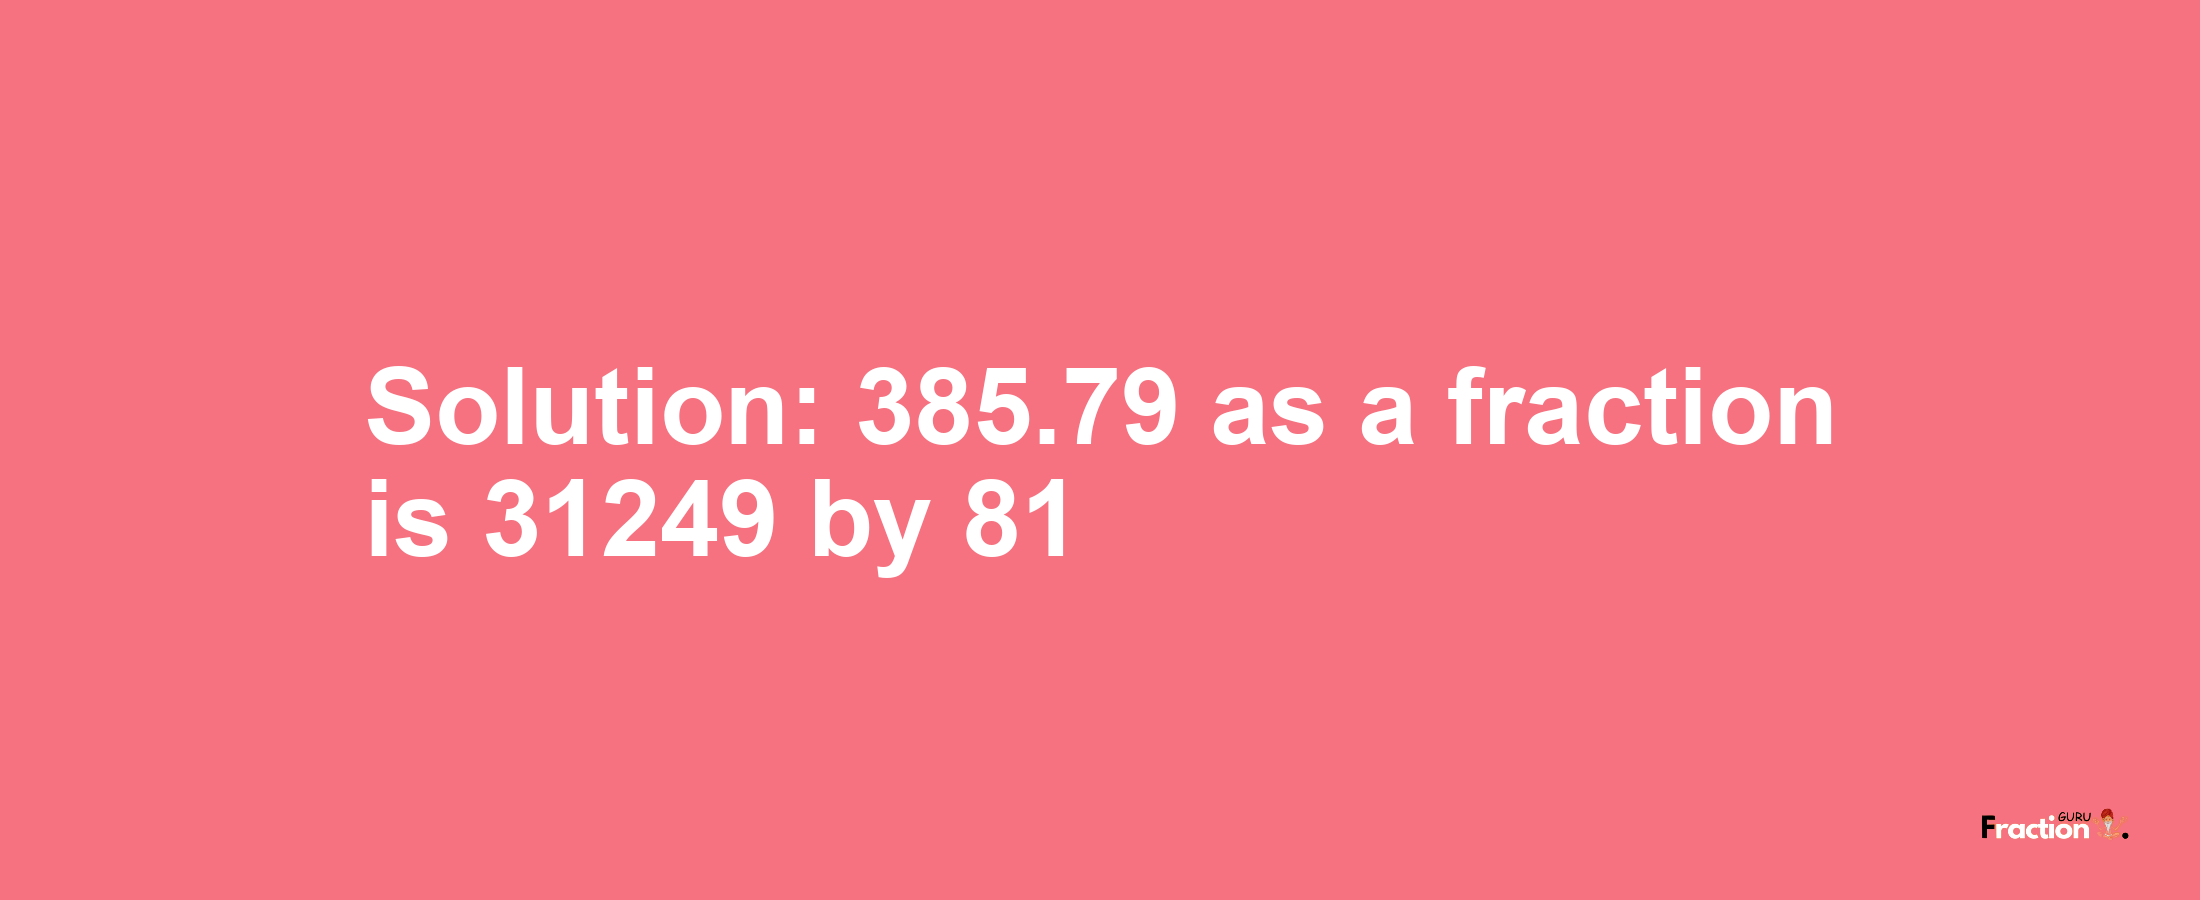 Solution:385.79 as a fraction is 31249/81